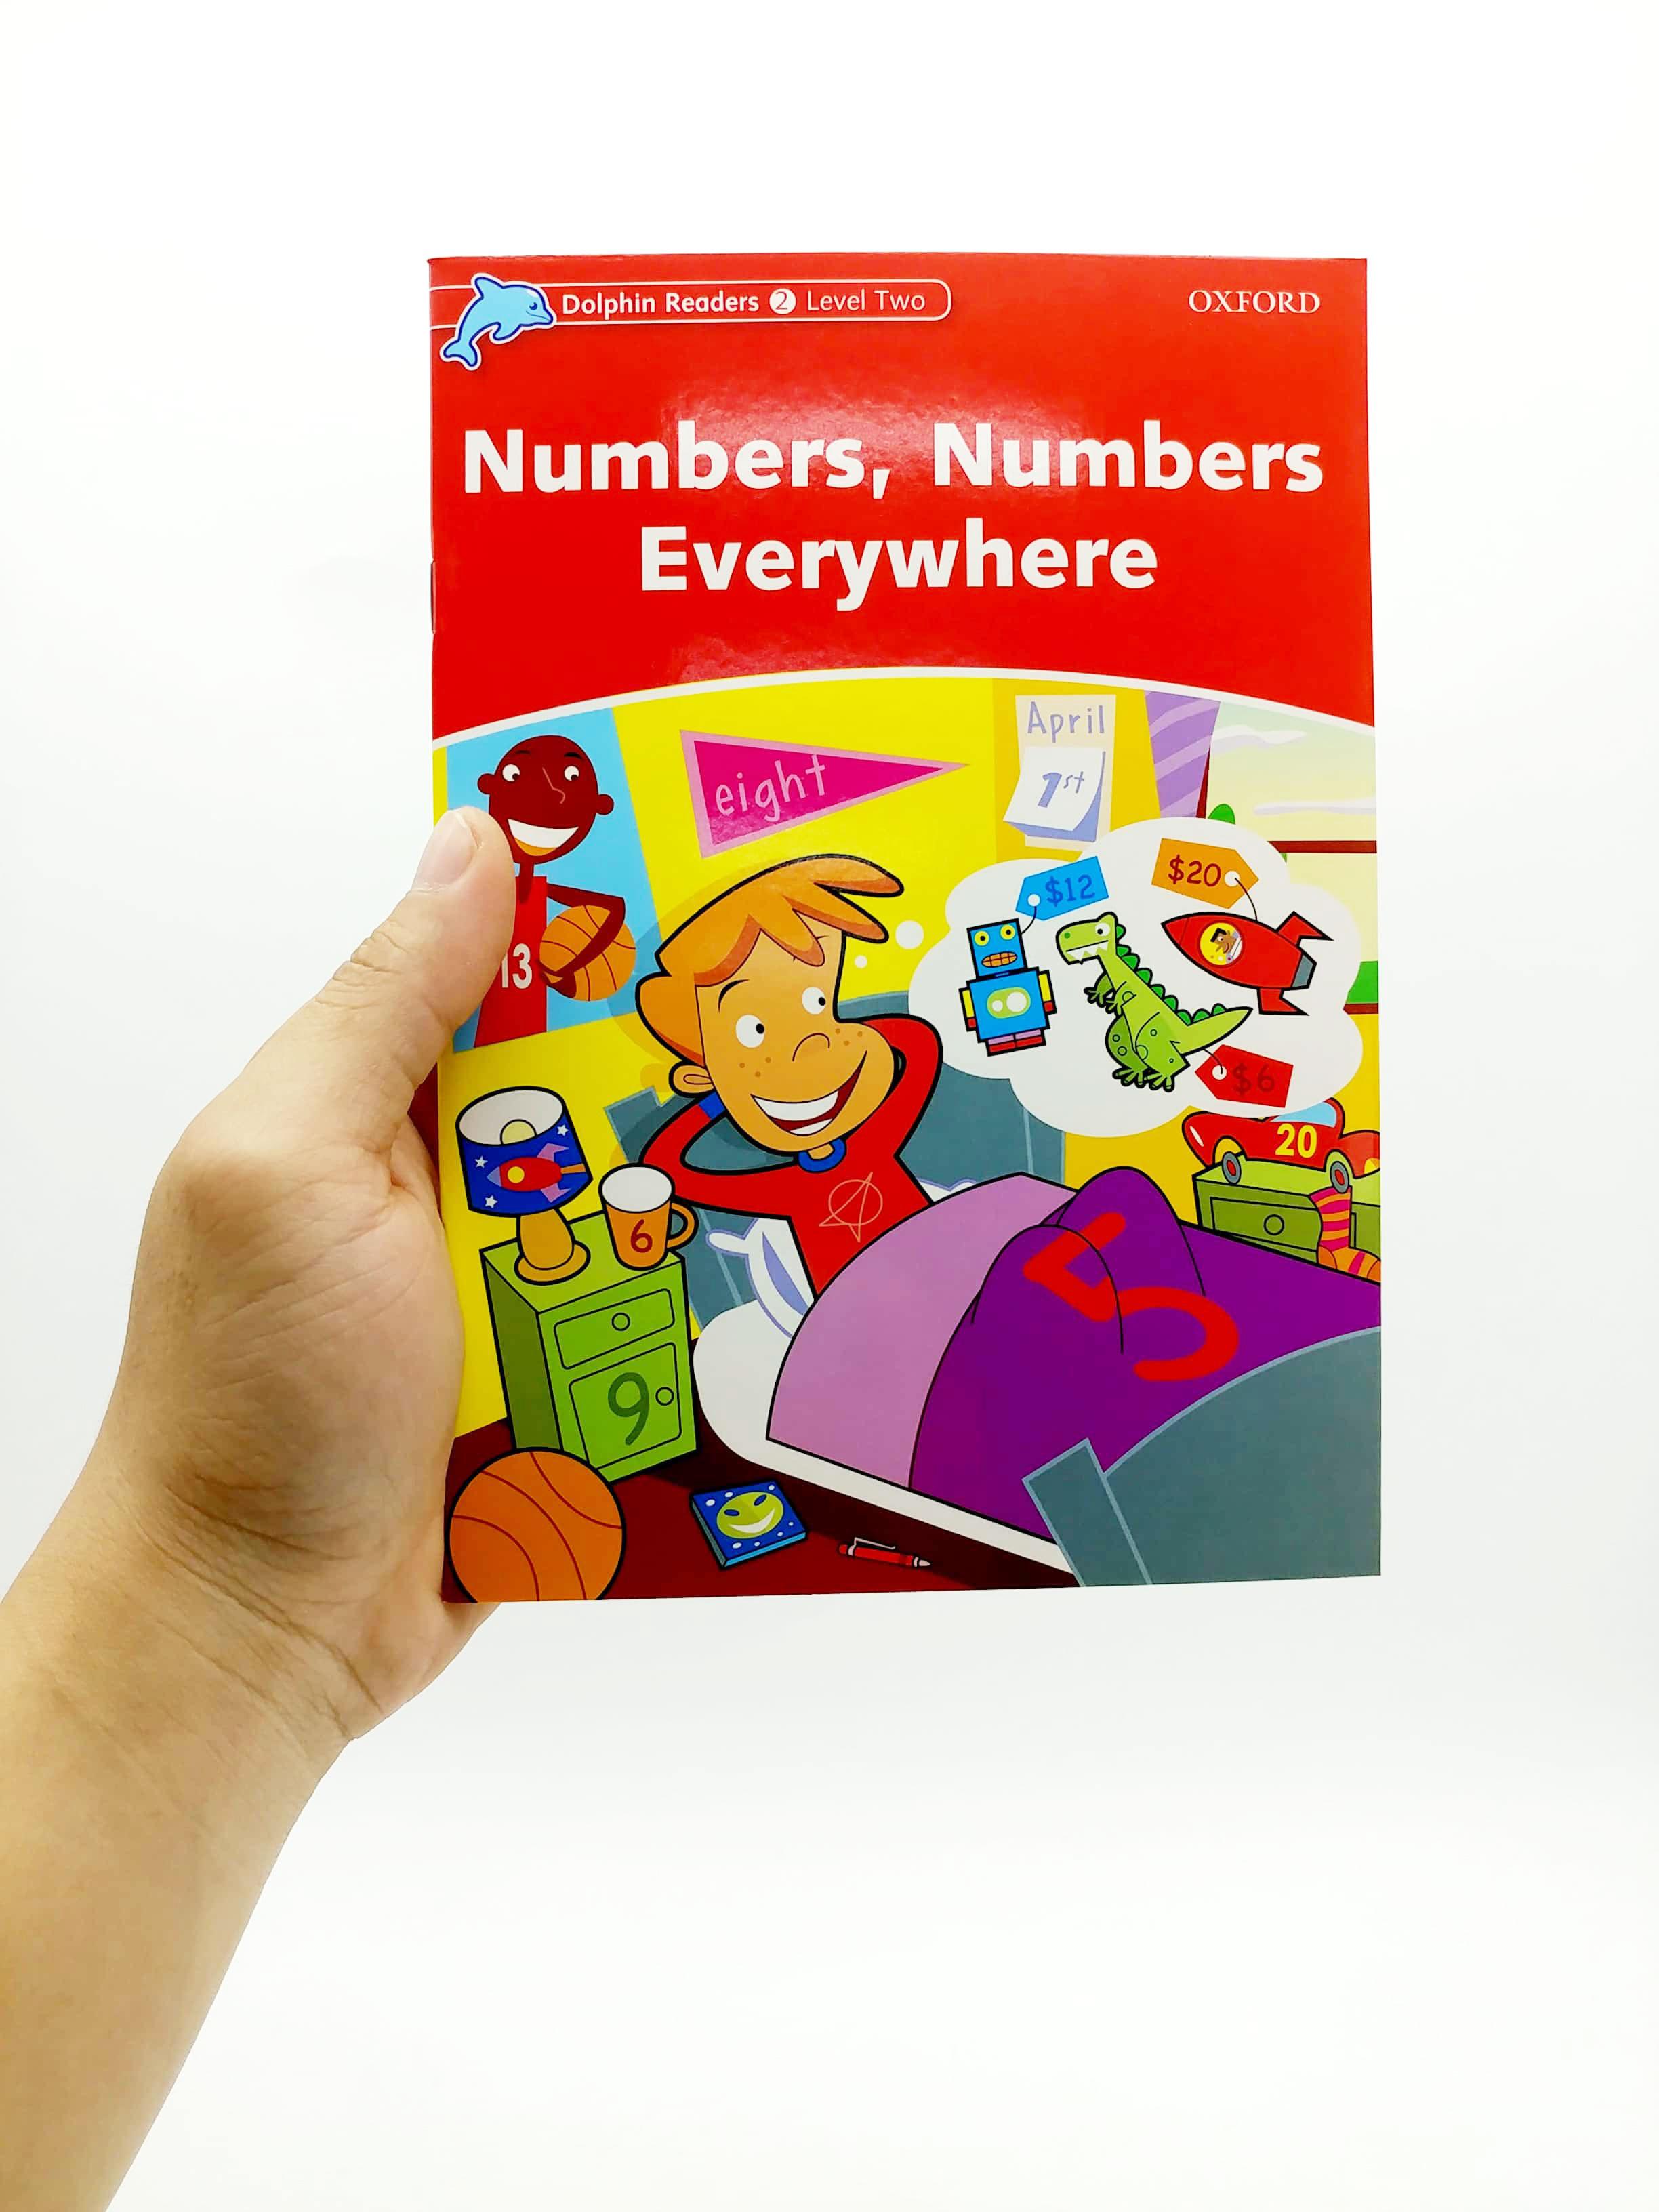 Dolphin Readers Level 2: Numbers, Numbers Everywhere